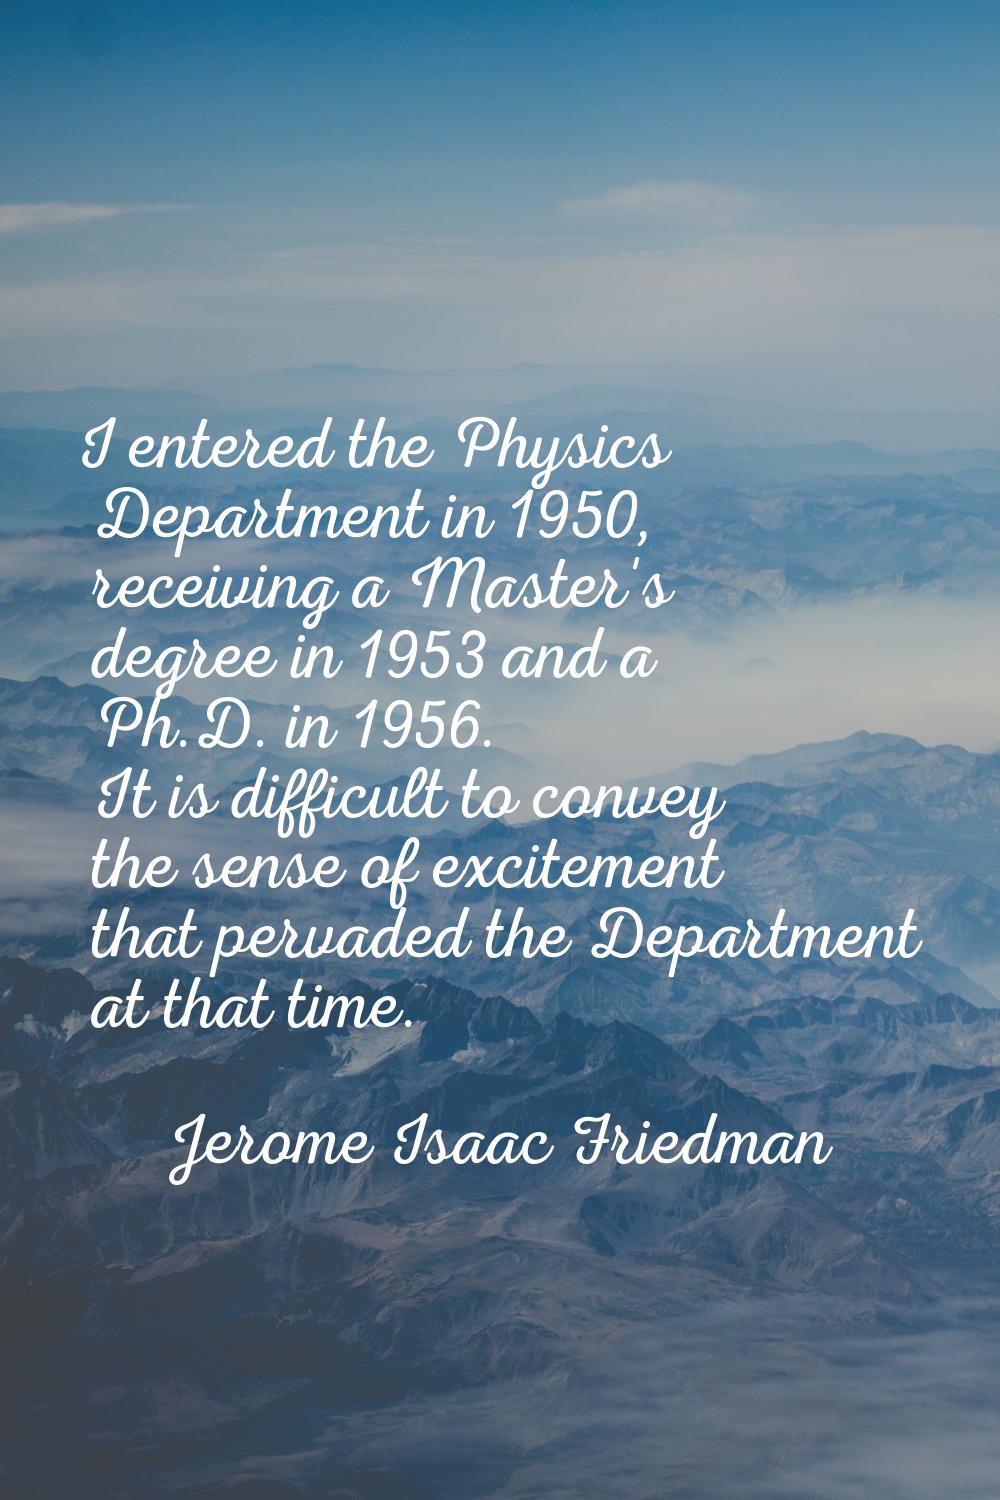 I entered the Physics Department in 1950, receiving a Master's degree in 1953 and a Ph.D. in 1956. 